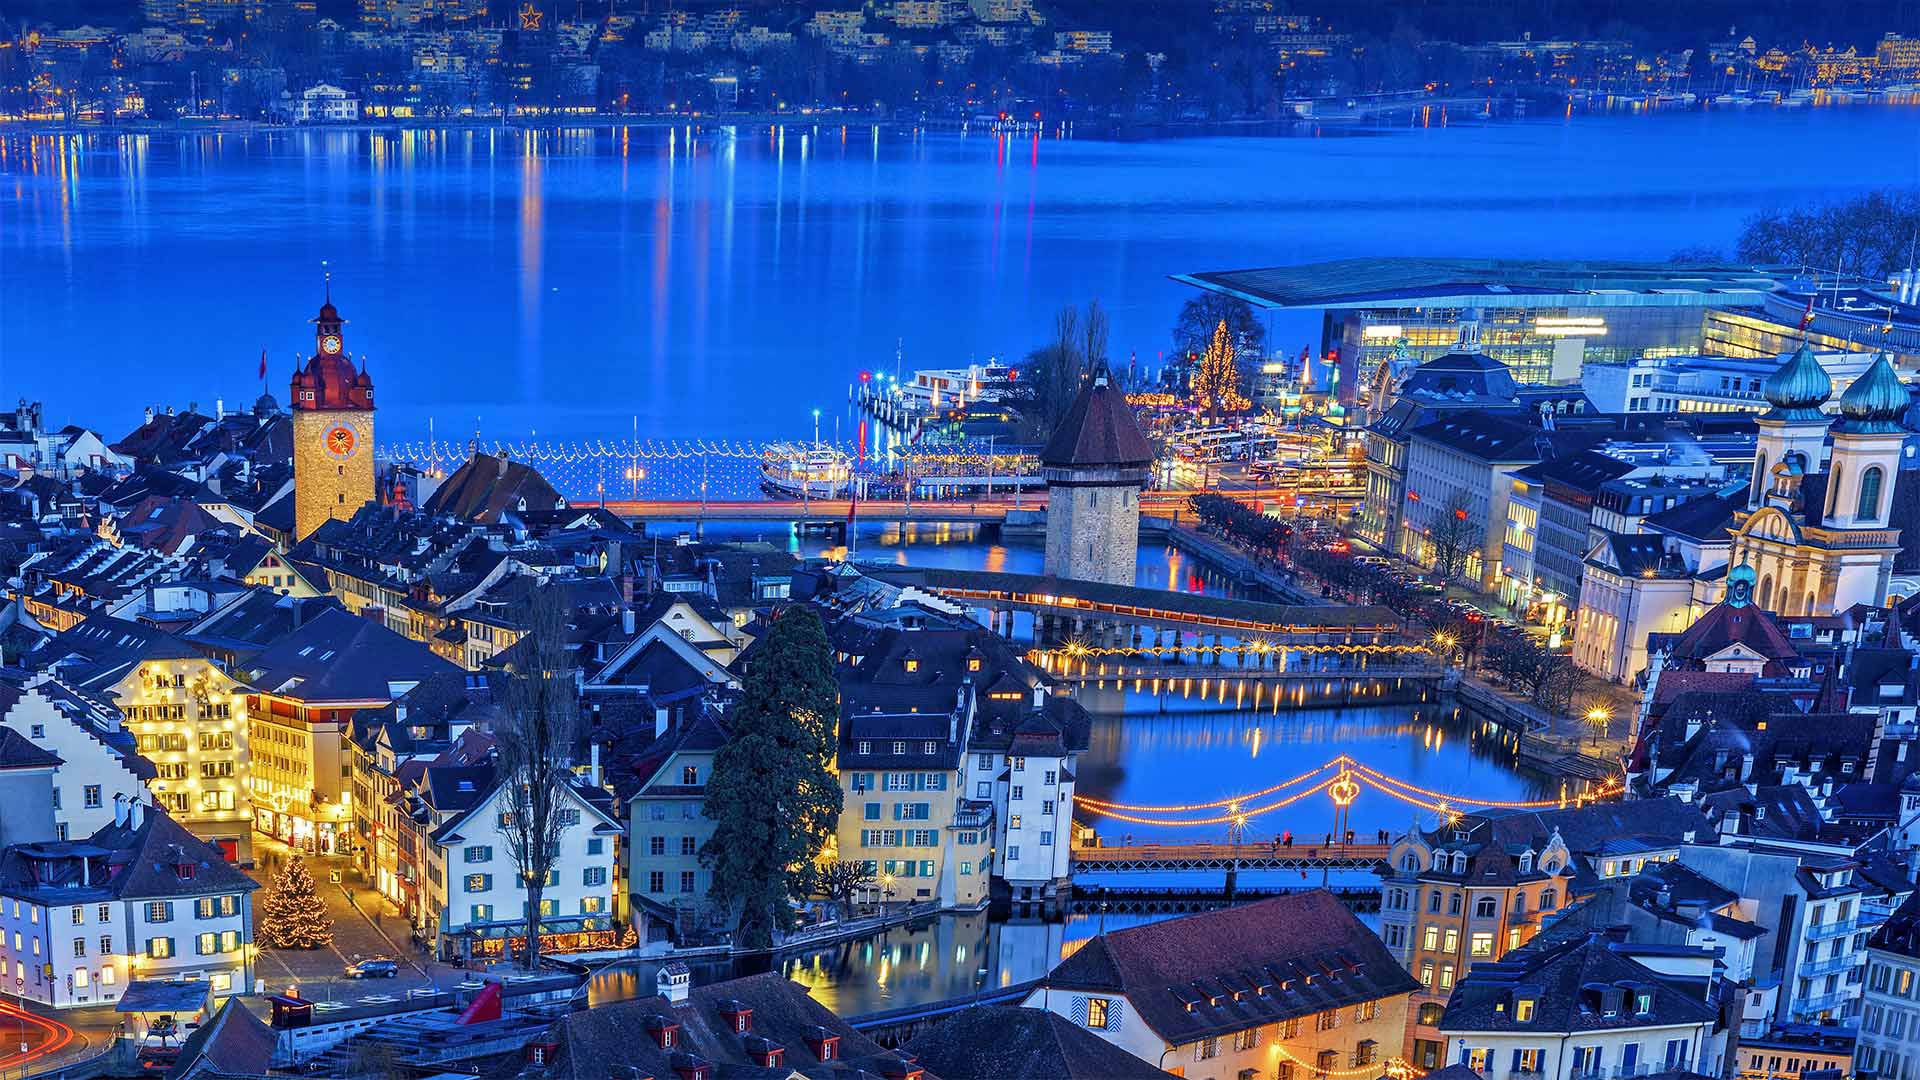 Old Town of Lucerne, Switzerland - Xantana/Getty Images)